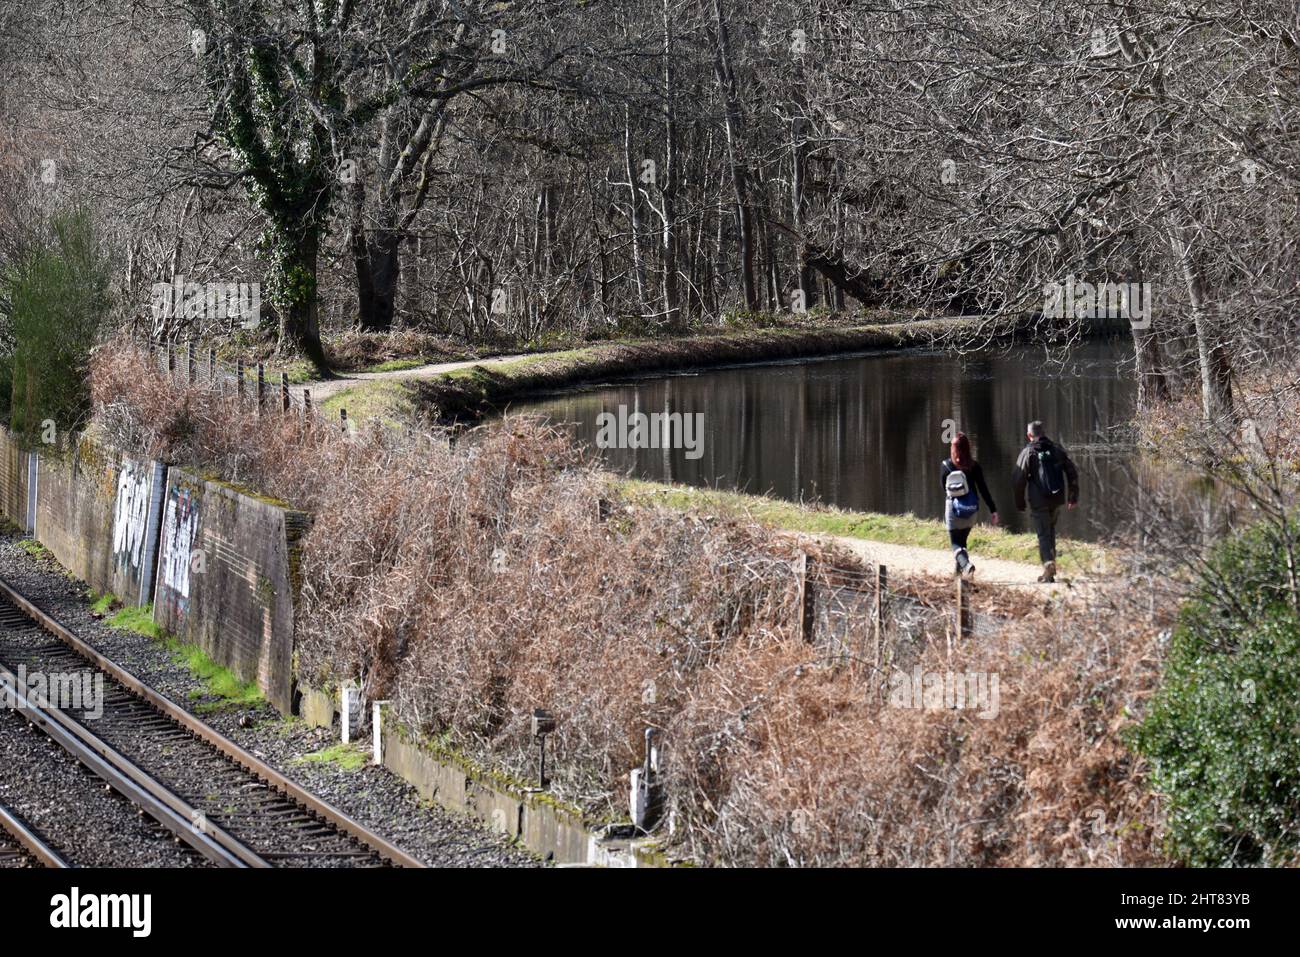 People walking on the towpath along the beautiful Basingstoke Canal in Surrey, at a point where it is a couple of metres above the adjacent railway. Stock Photo